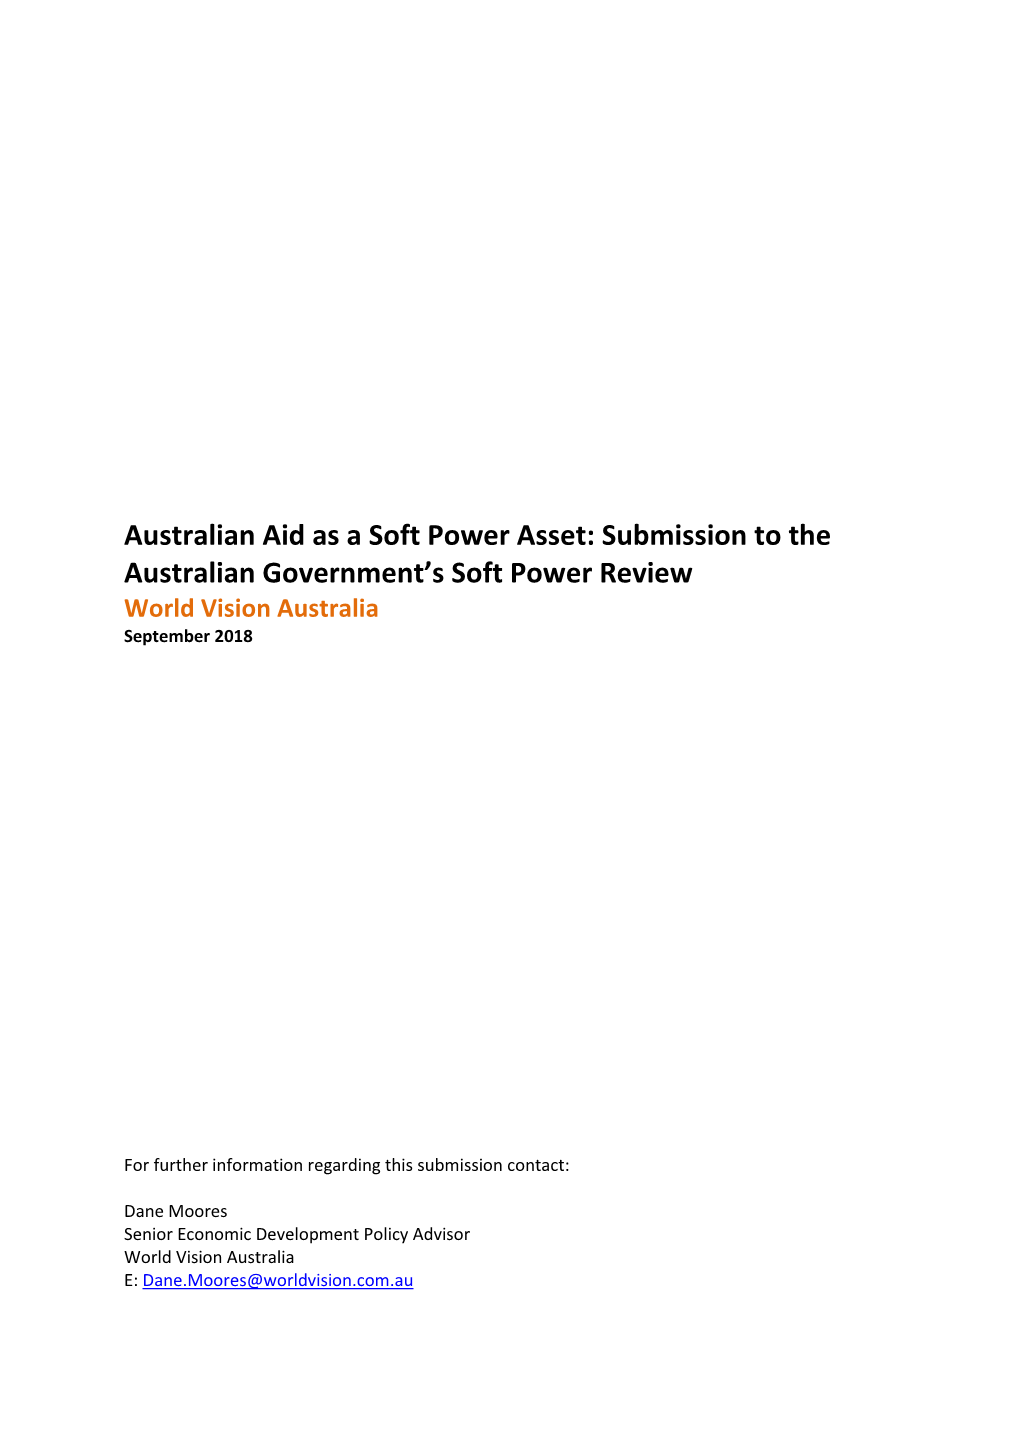 Australian Aid As a Soft Power Asset: Submission to the Australian Government’S Soft Power Review World Vision Australia September 2018